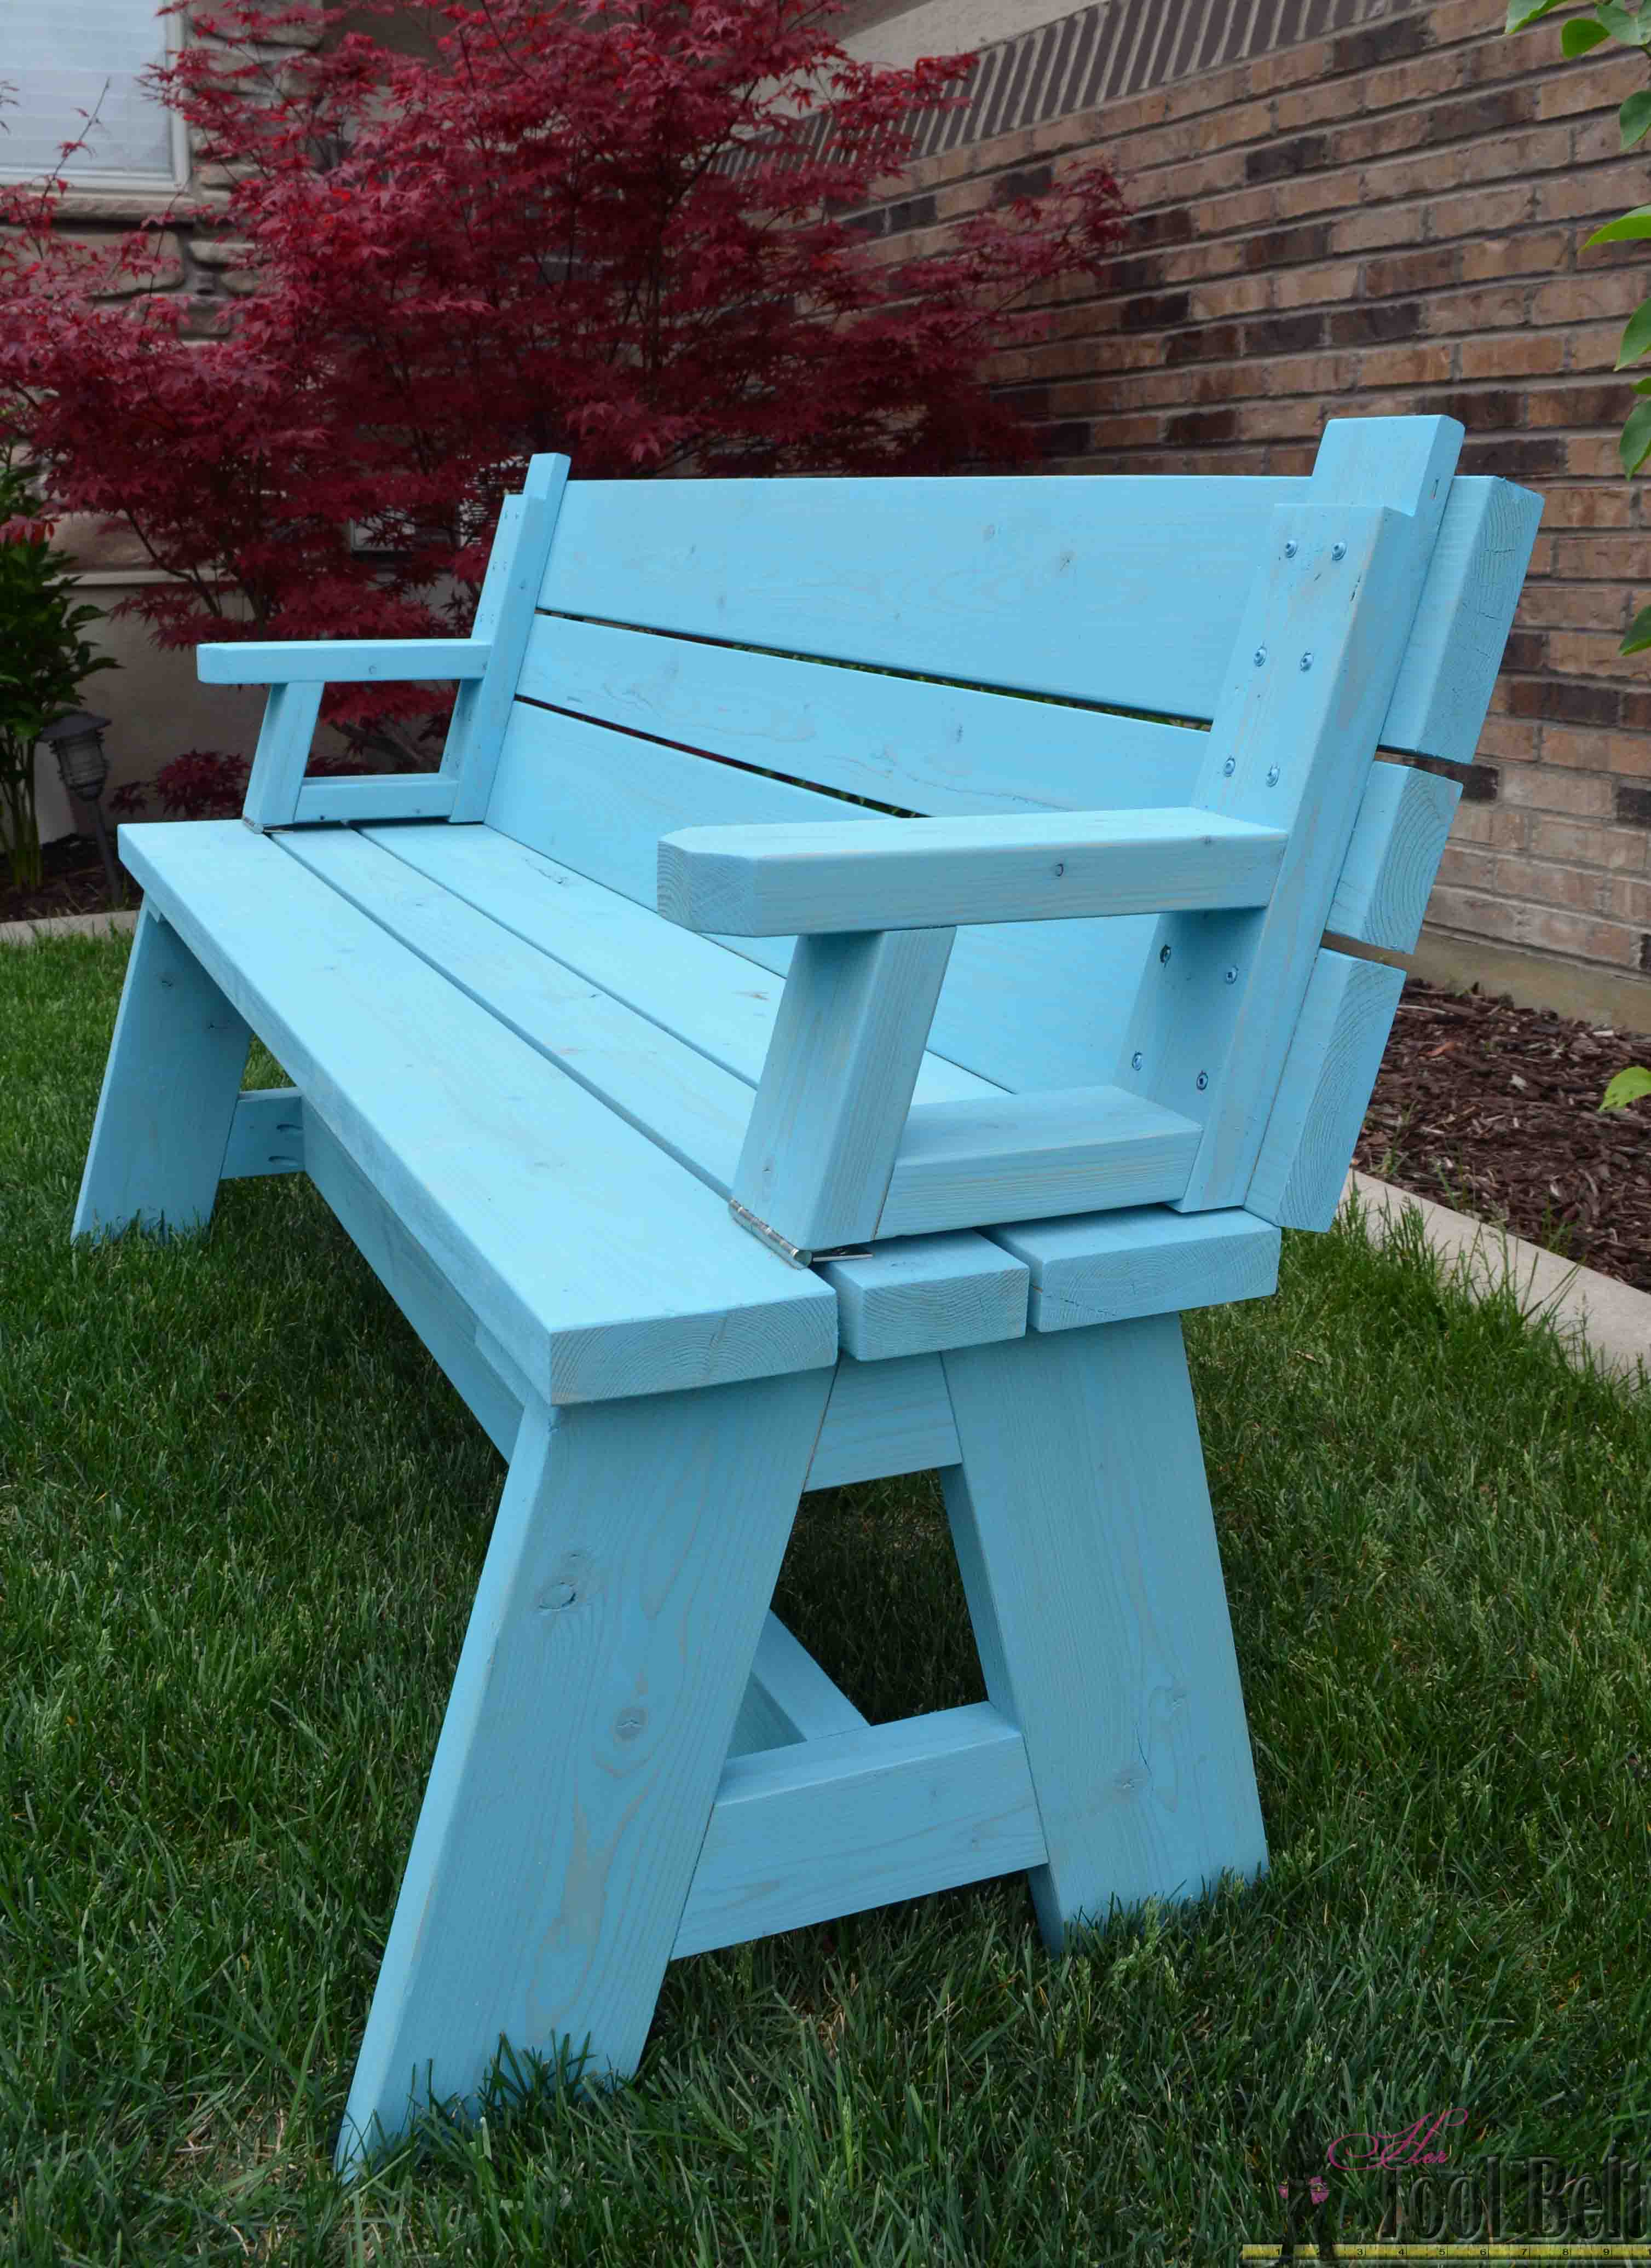 convertible picnic table and bench - her tool belt